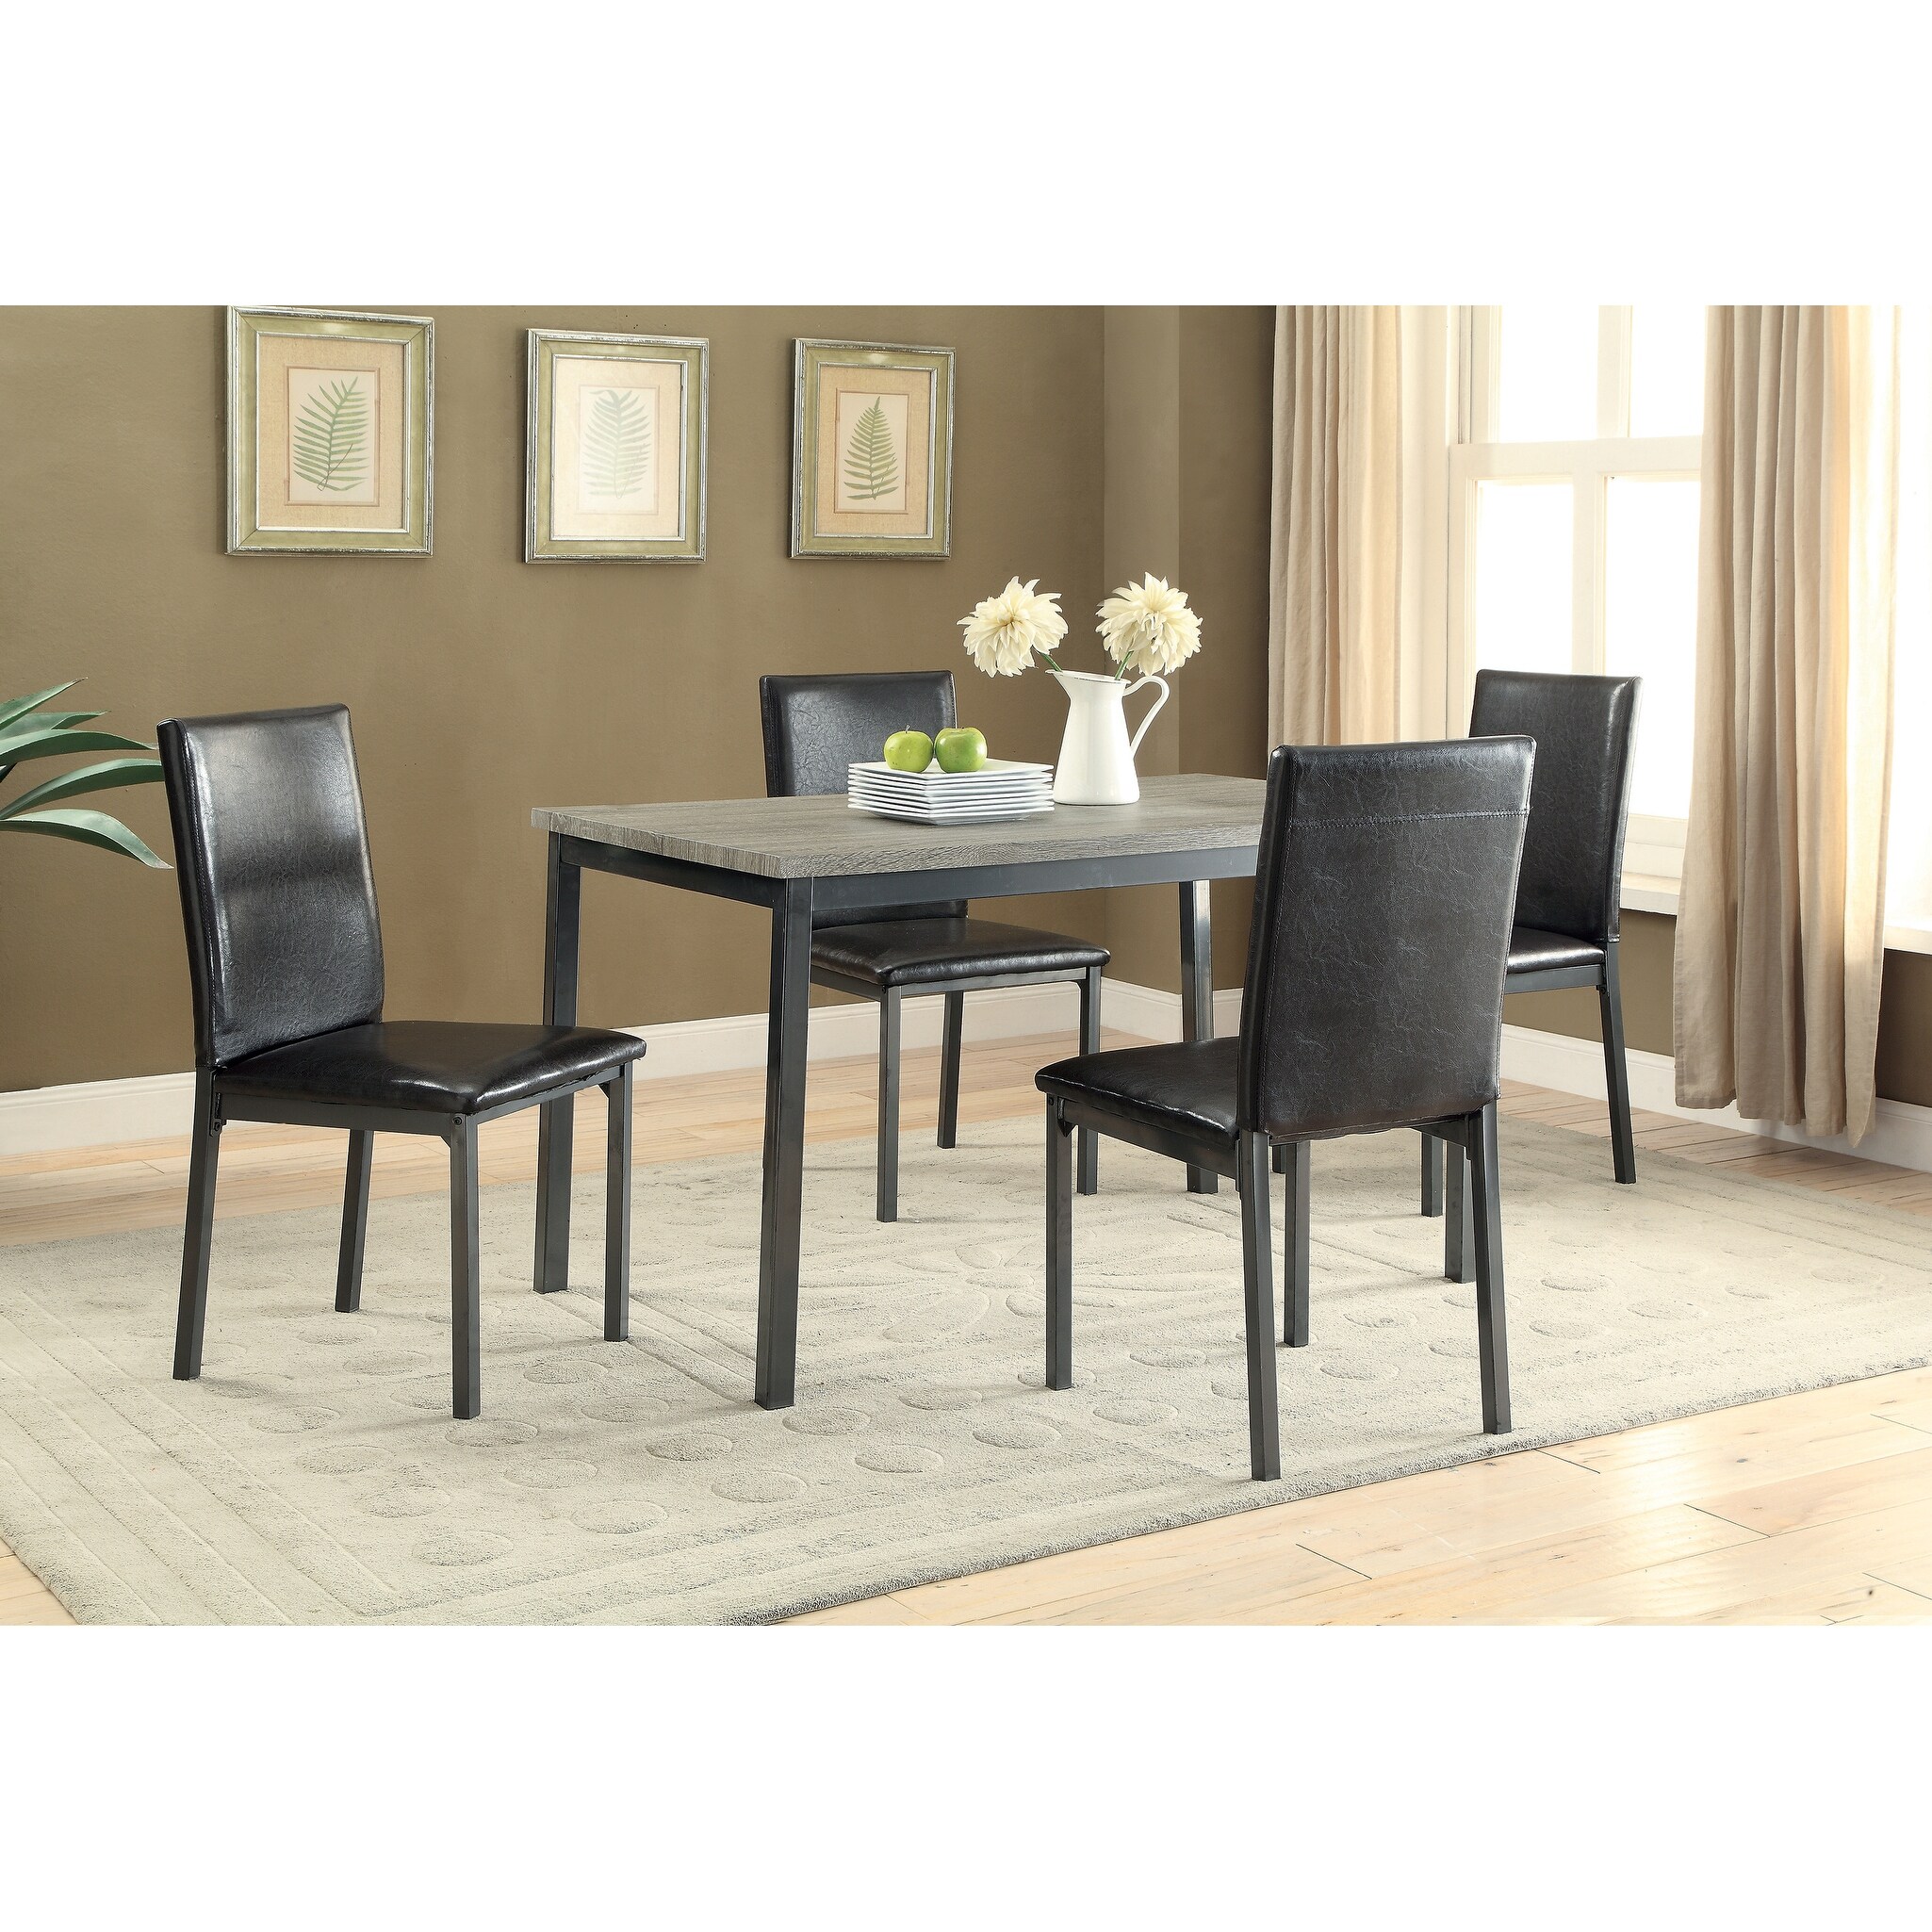 Hadsten Black Upholstery Dining Chairs (Set of 8)